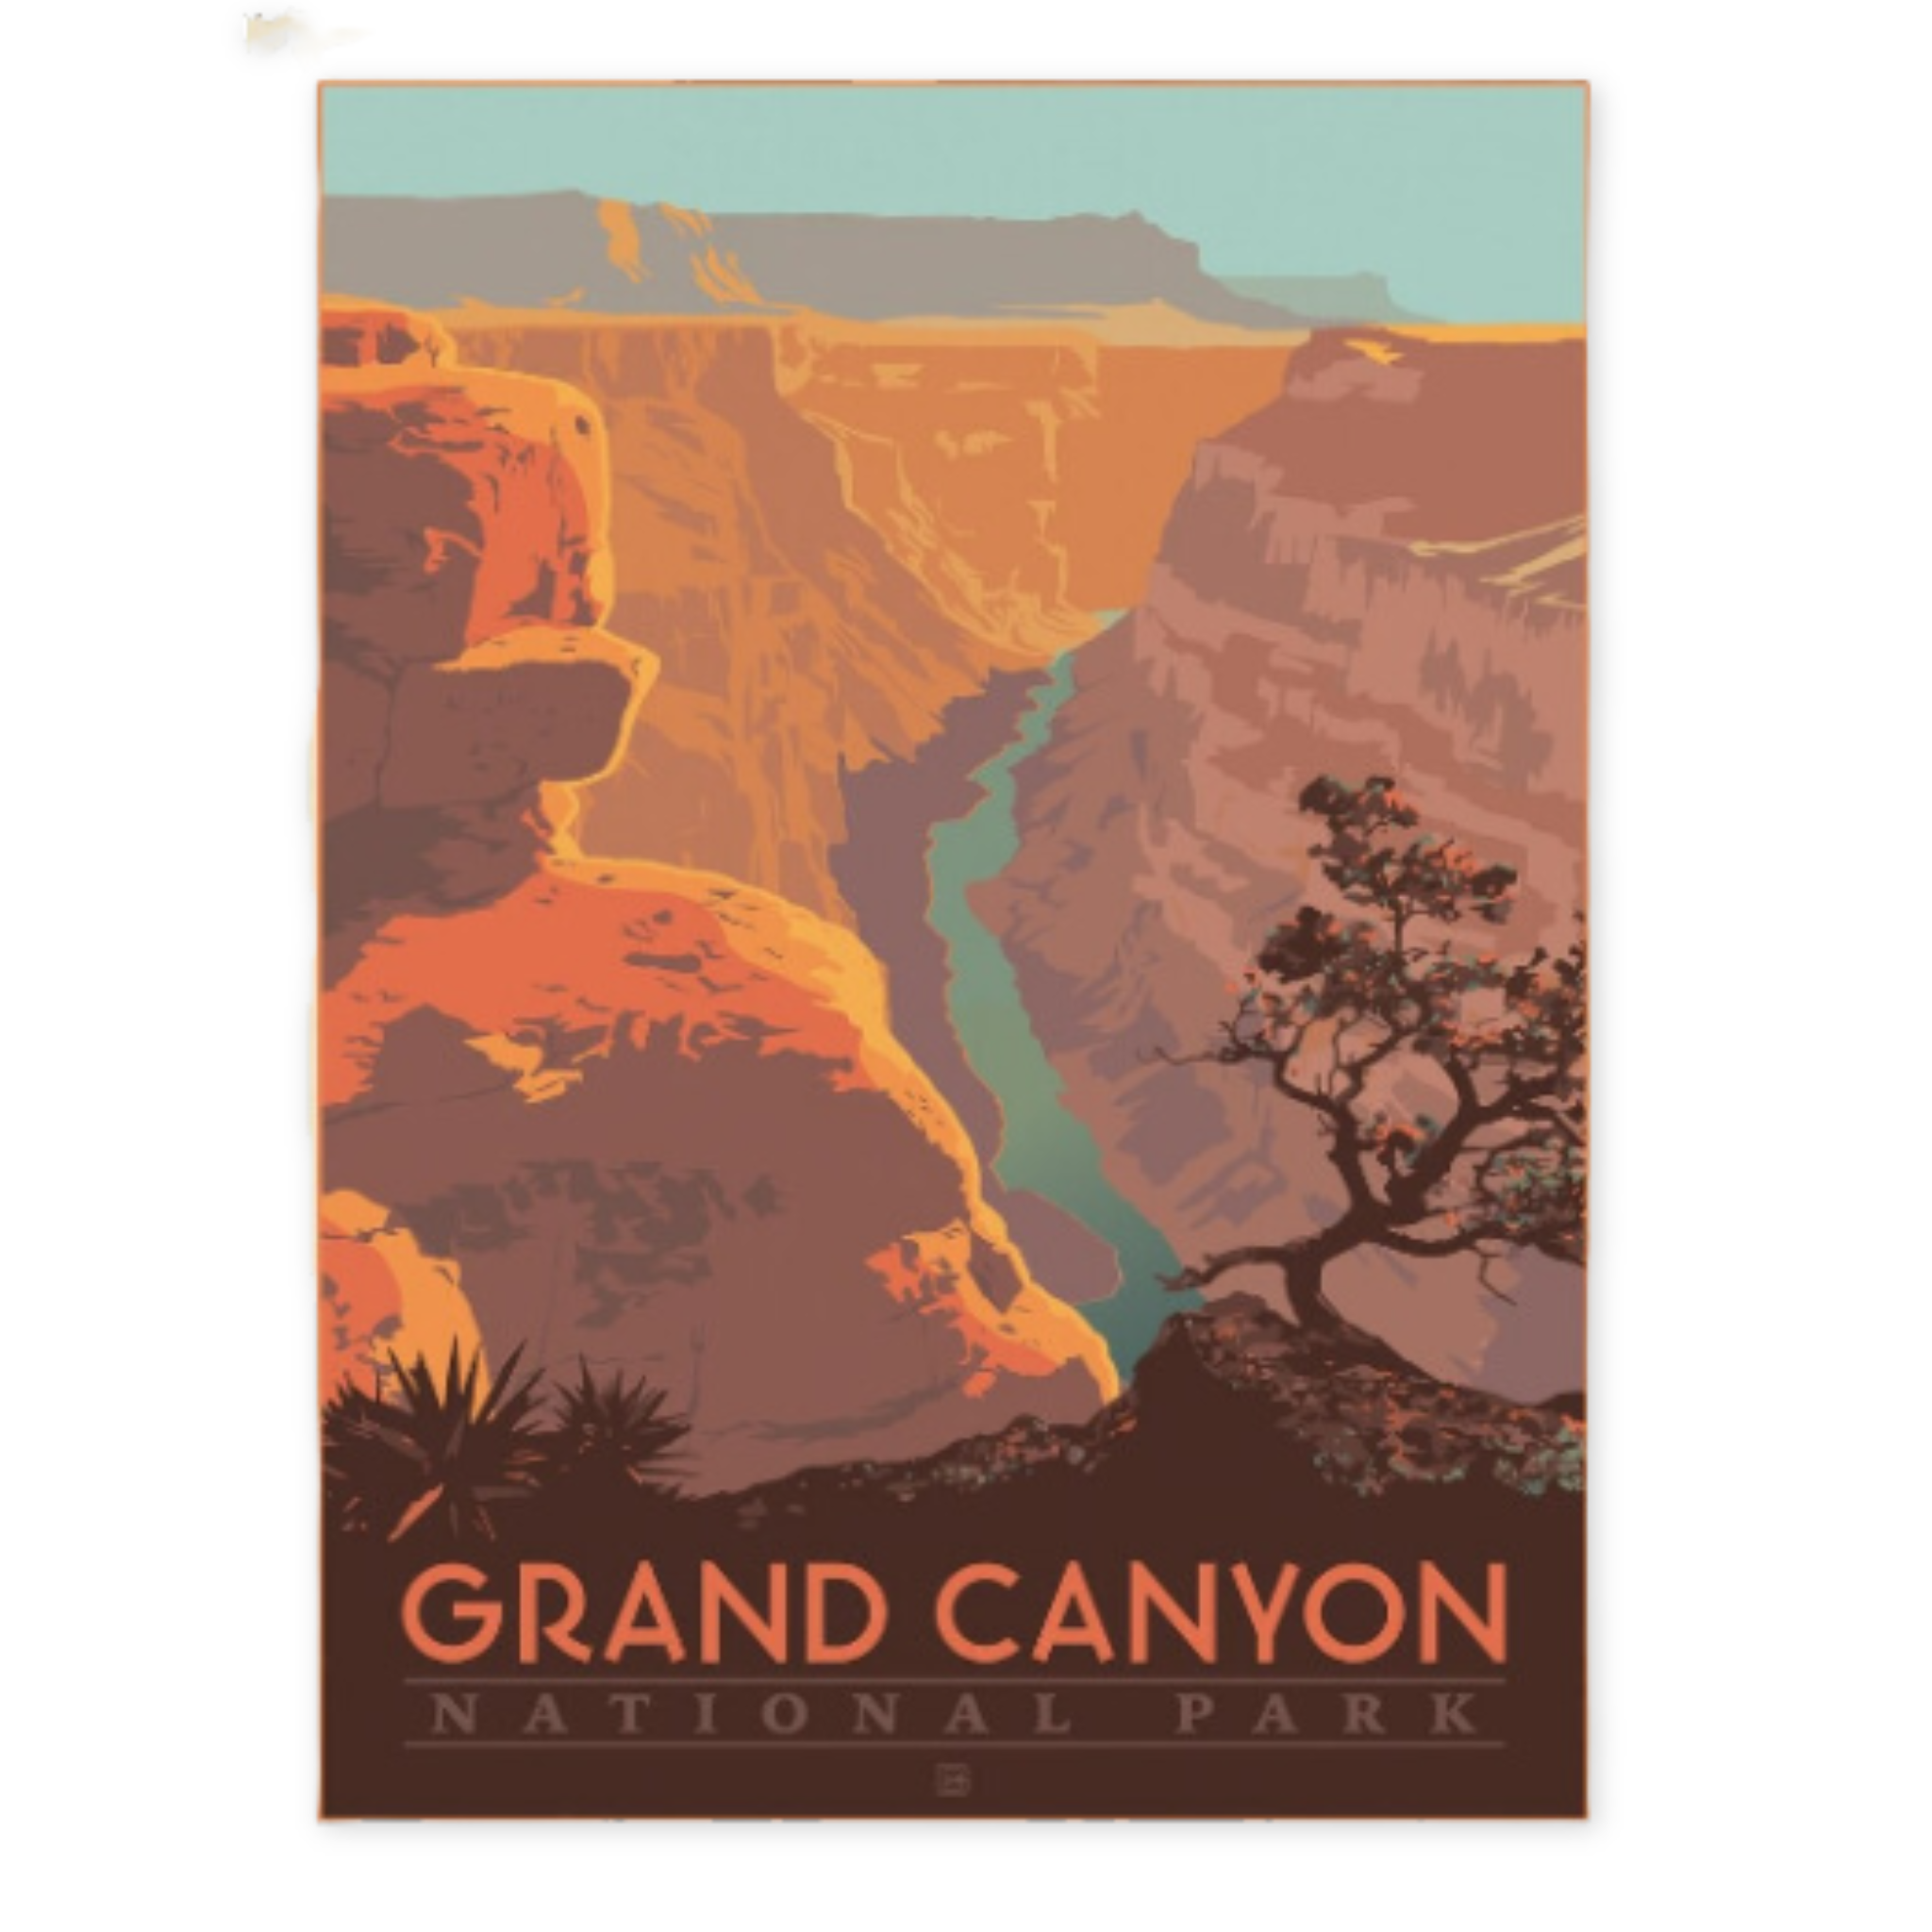 print of grand canyon national park with an image of the grand canyon